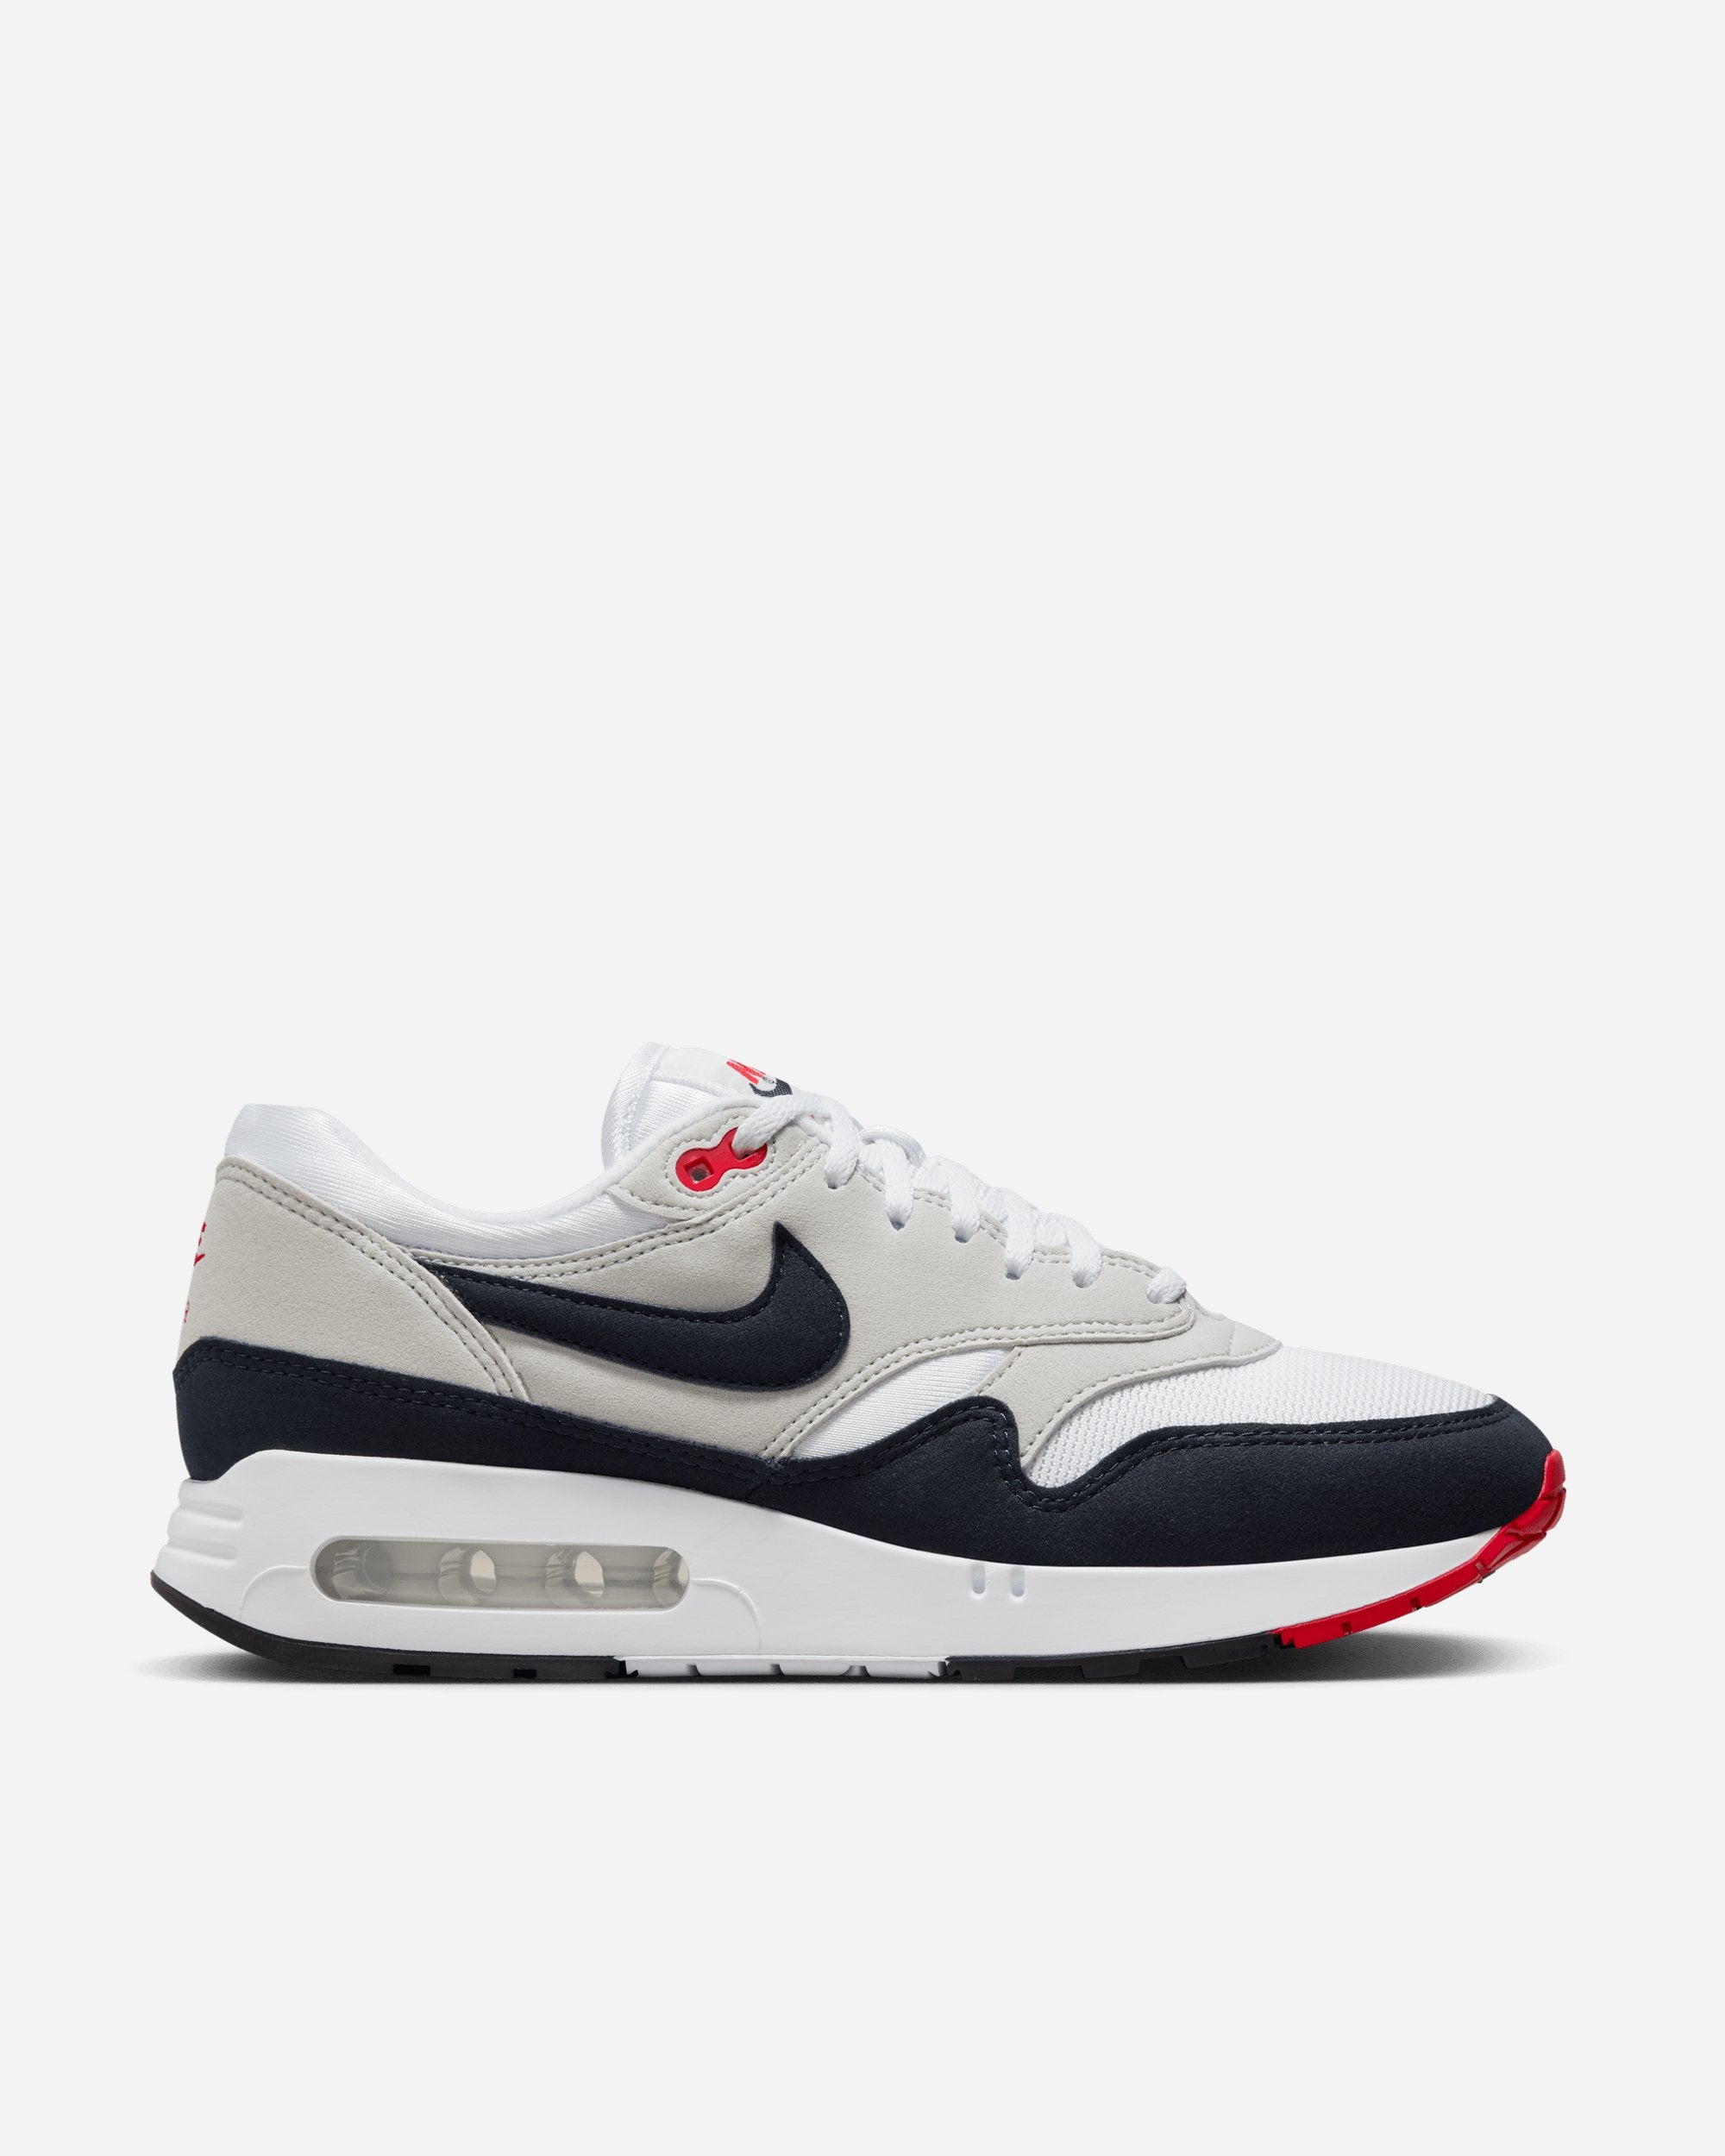 Nike Air Max 1'86 OG 'Big Bubble Sport Red' WHITE/OBSIDIAN-NEUTRAL ...